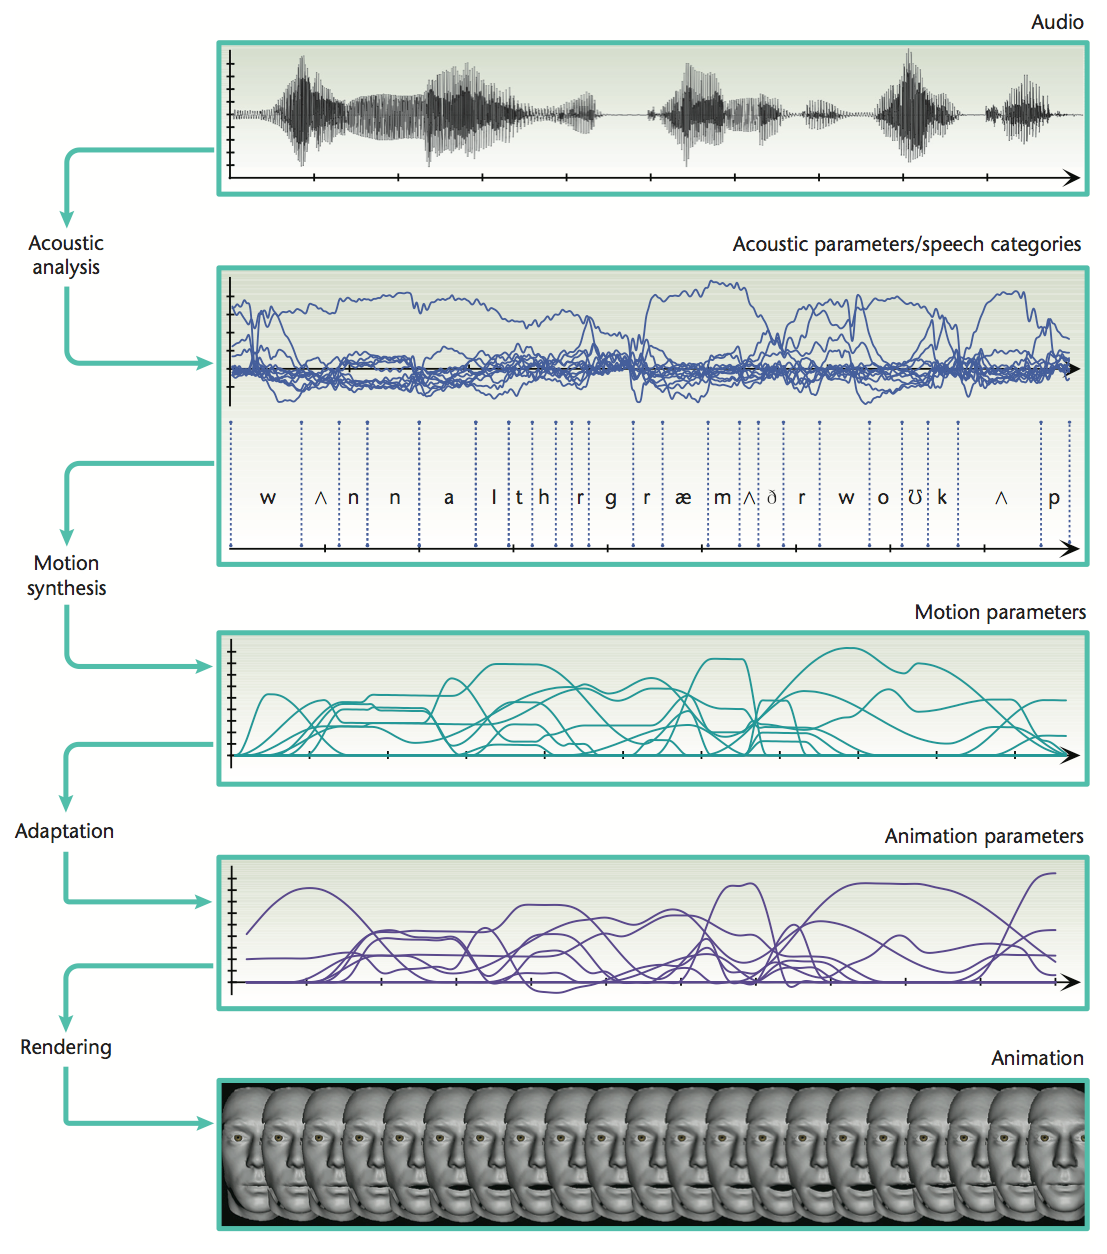 Figure 1: Processing in the Speech Graphics pipeline (reproduced from [6])